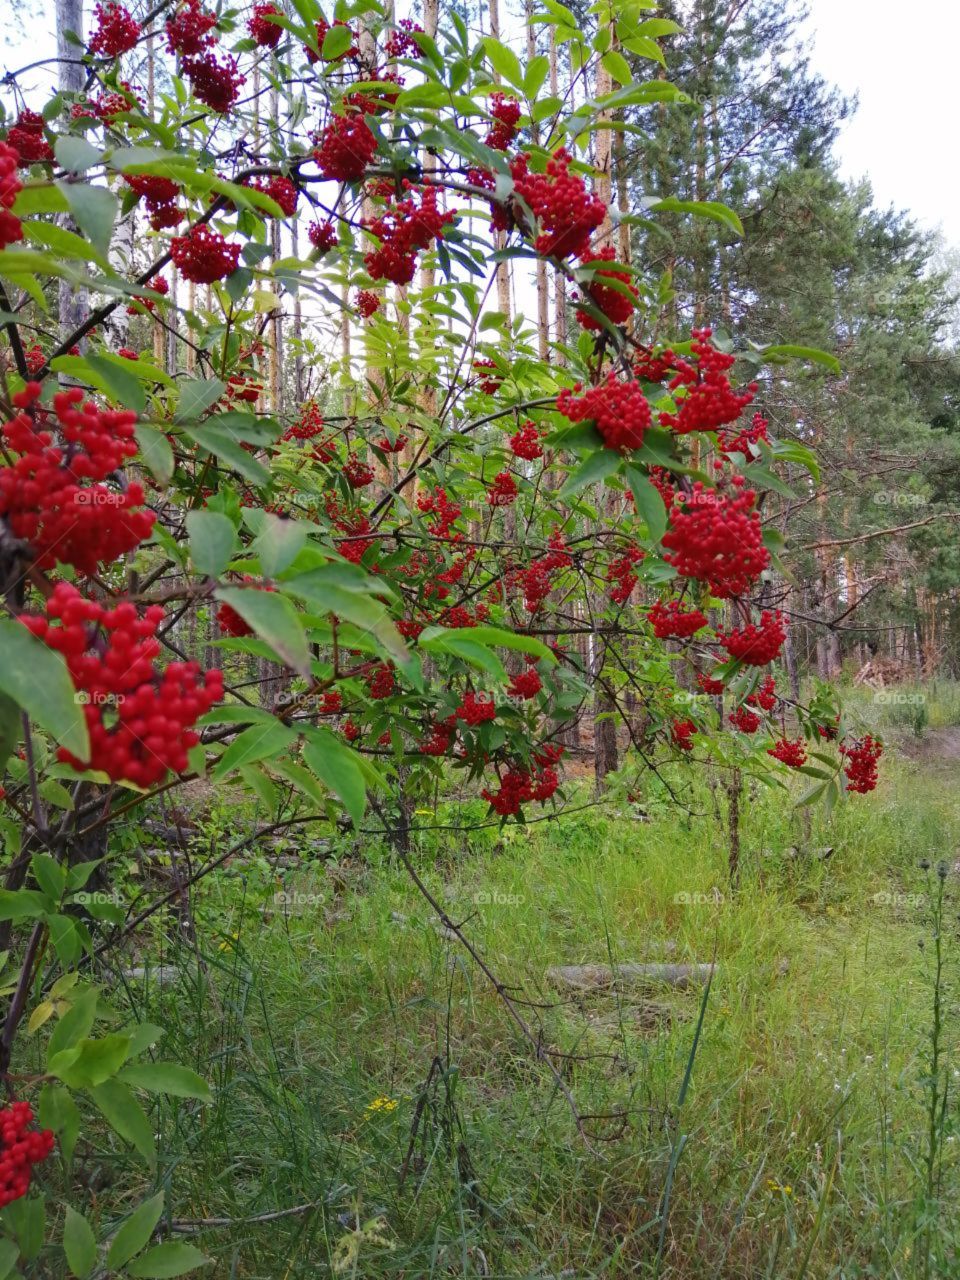 Red berries (potassium, wolf berry) on a branch in the forest